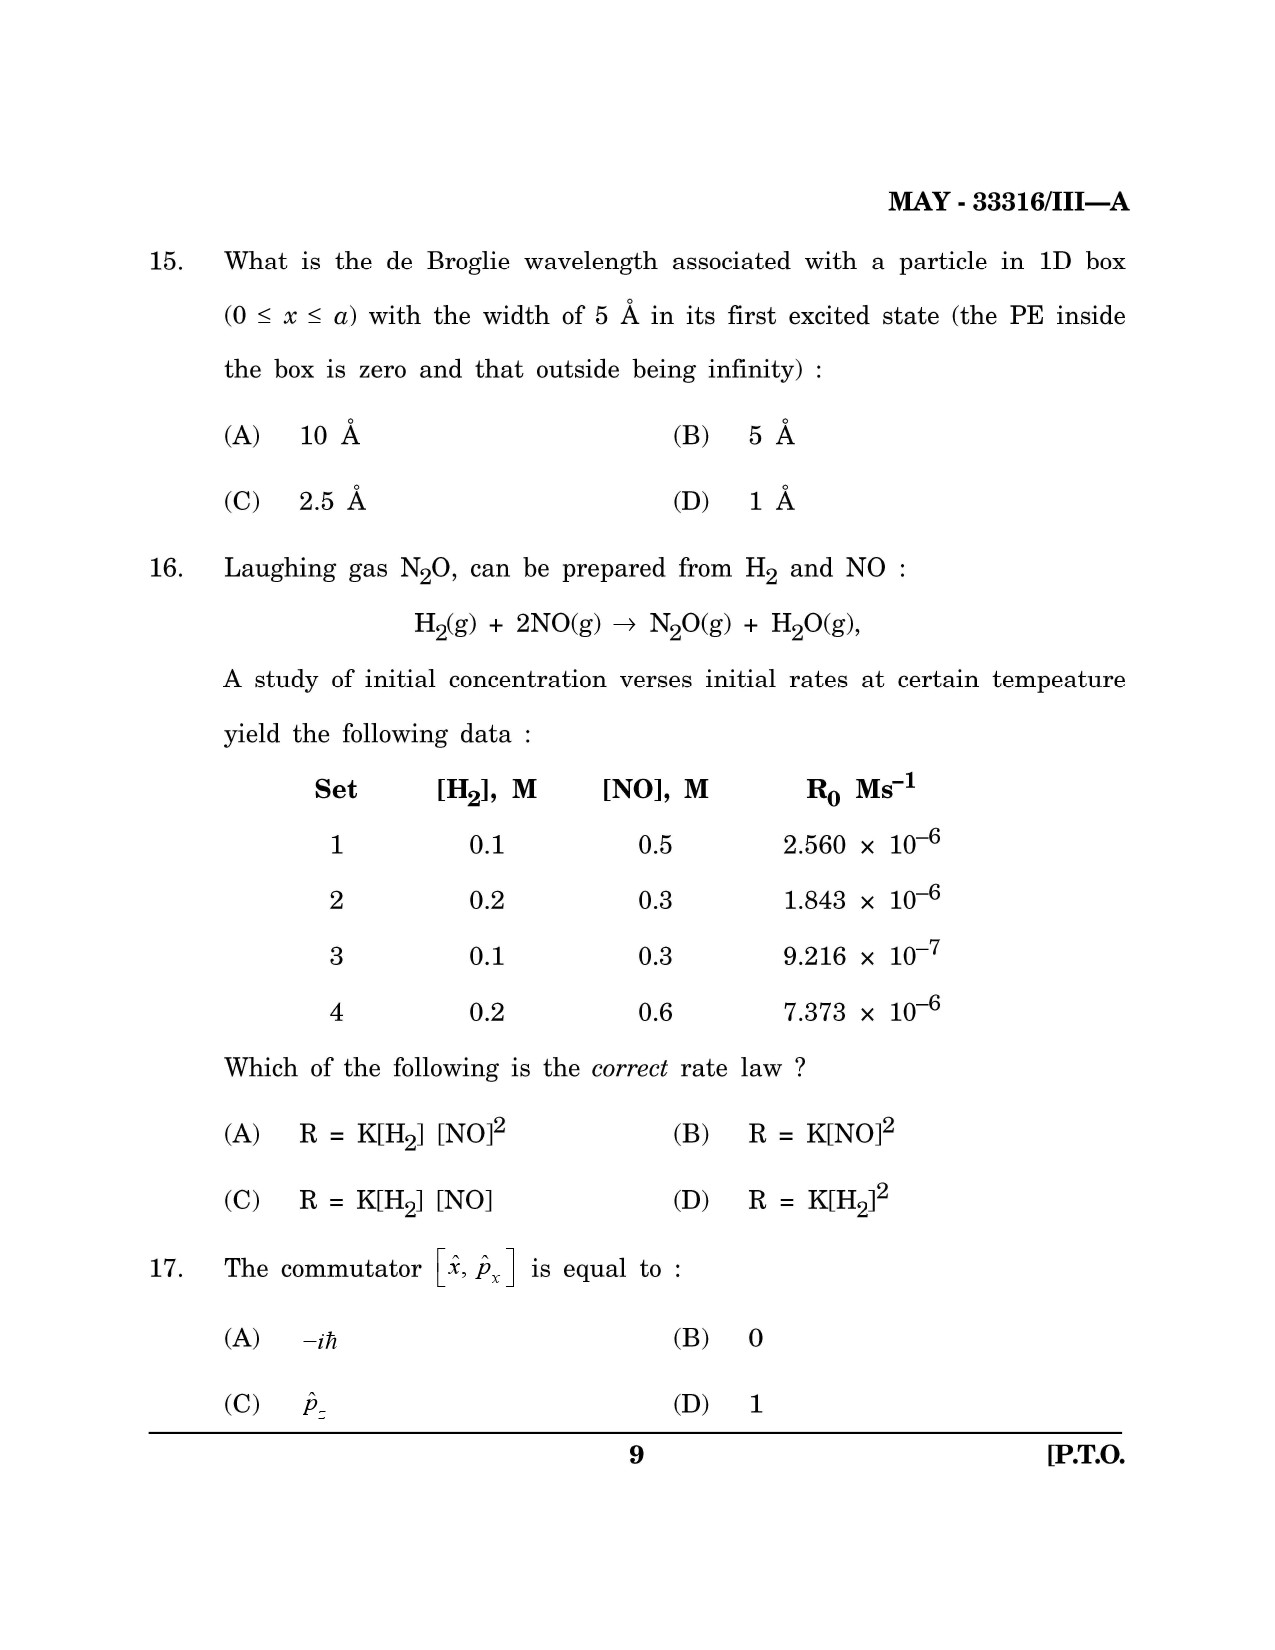 Maharashtra SET Chemical Sciences Question Paper III May 2016 8